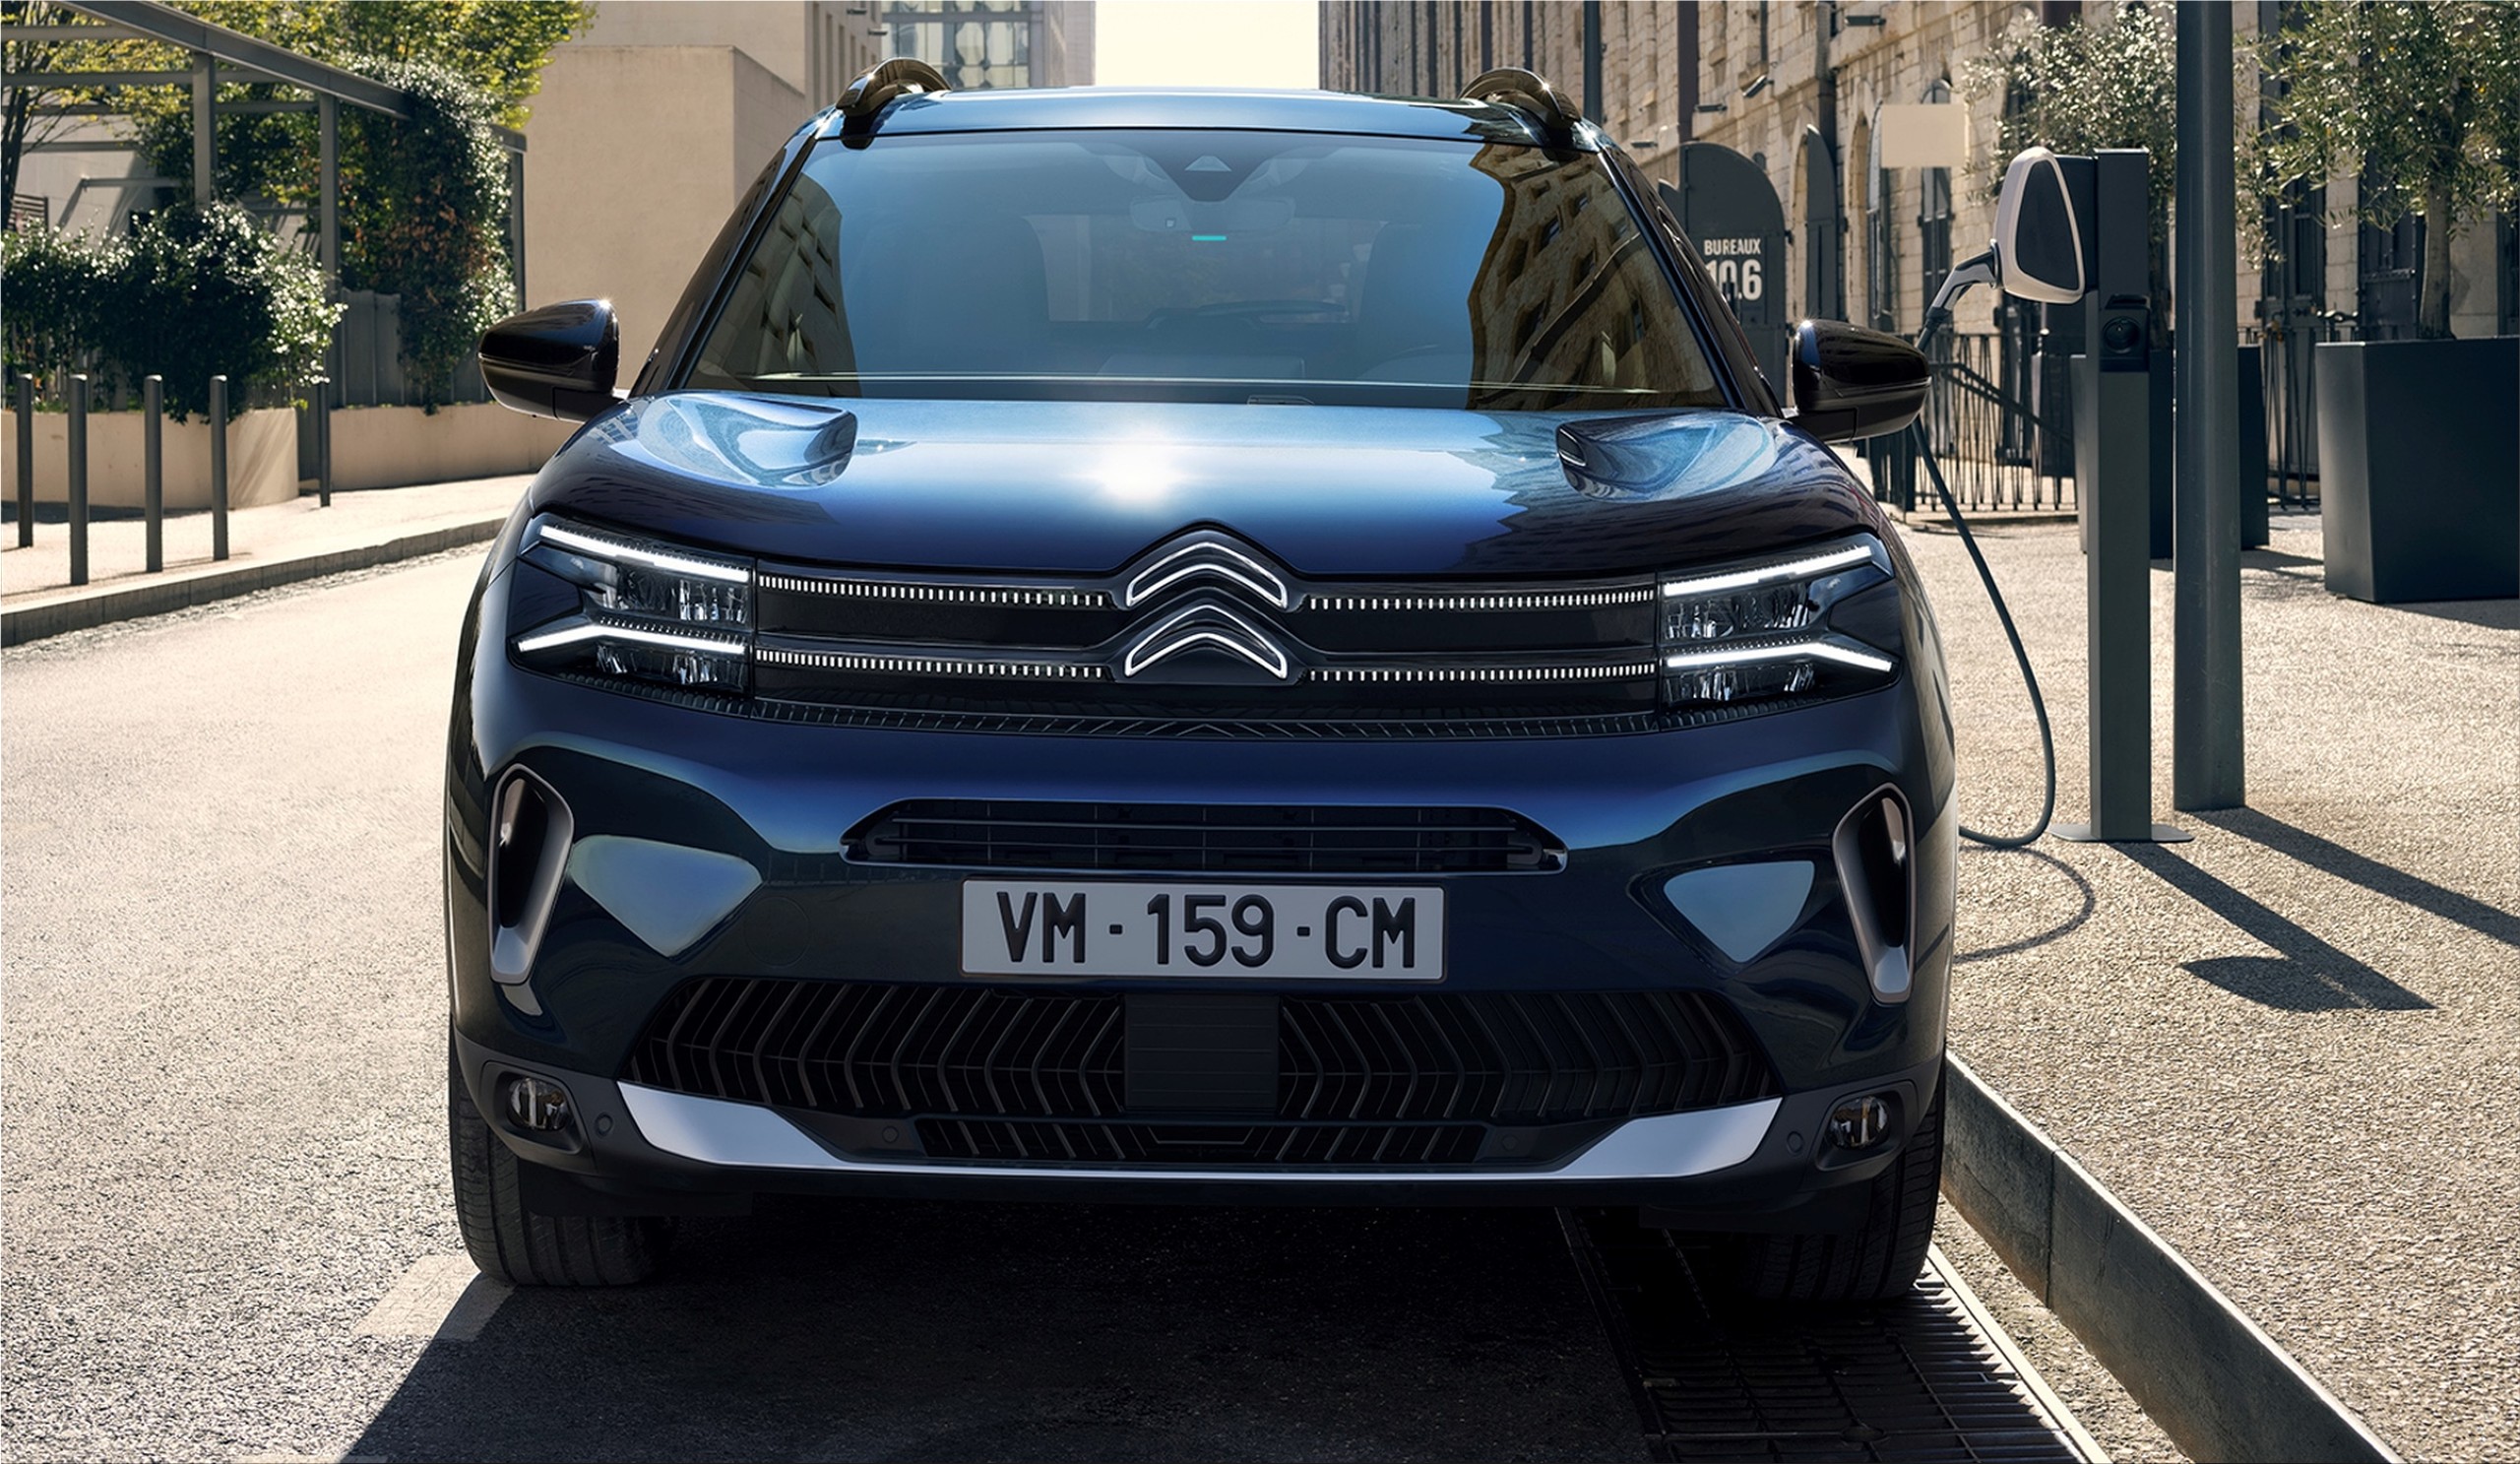 CITROËN C5 AIRCROSS: MORE MODERN AND TECHNOLOGICAL - Auto&Design